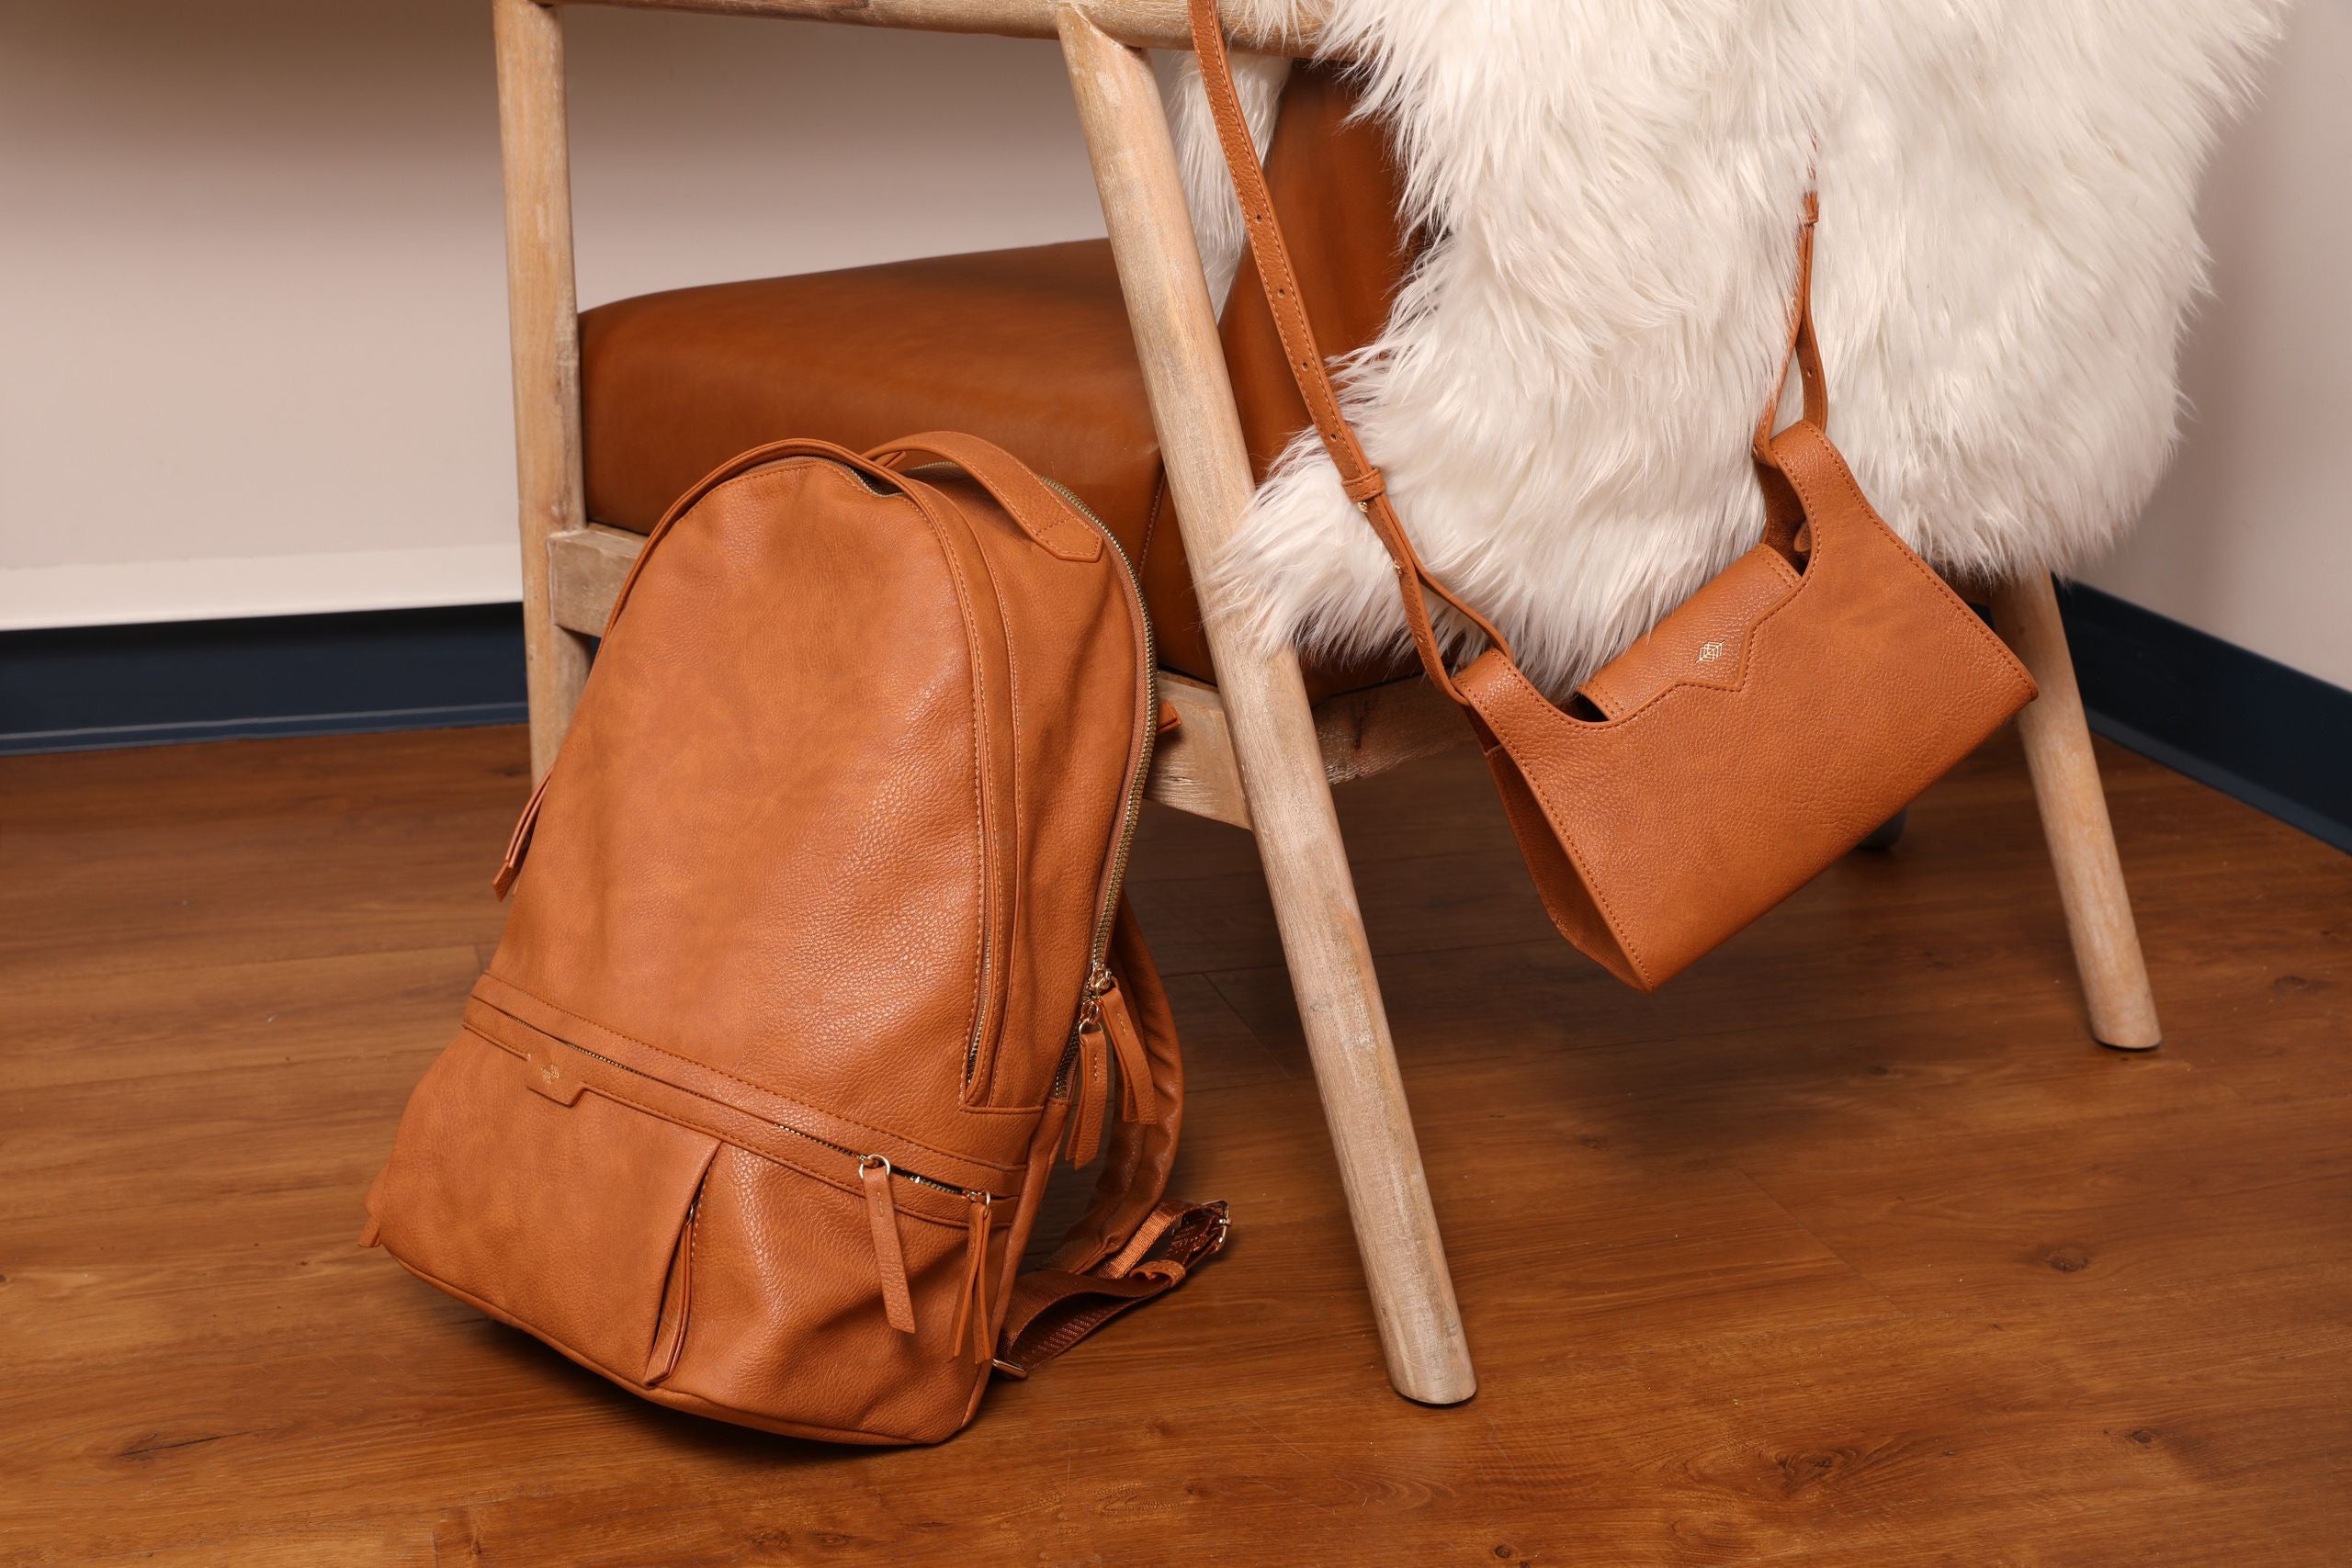 23 Handmade Leather Backpacks That Are Stylish and Functional